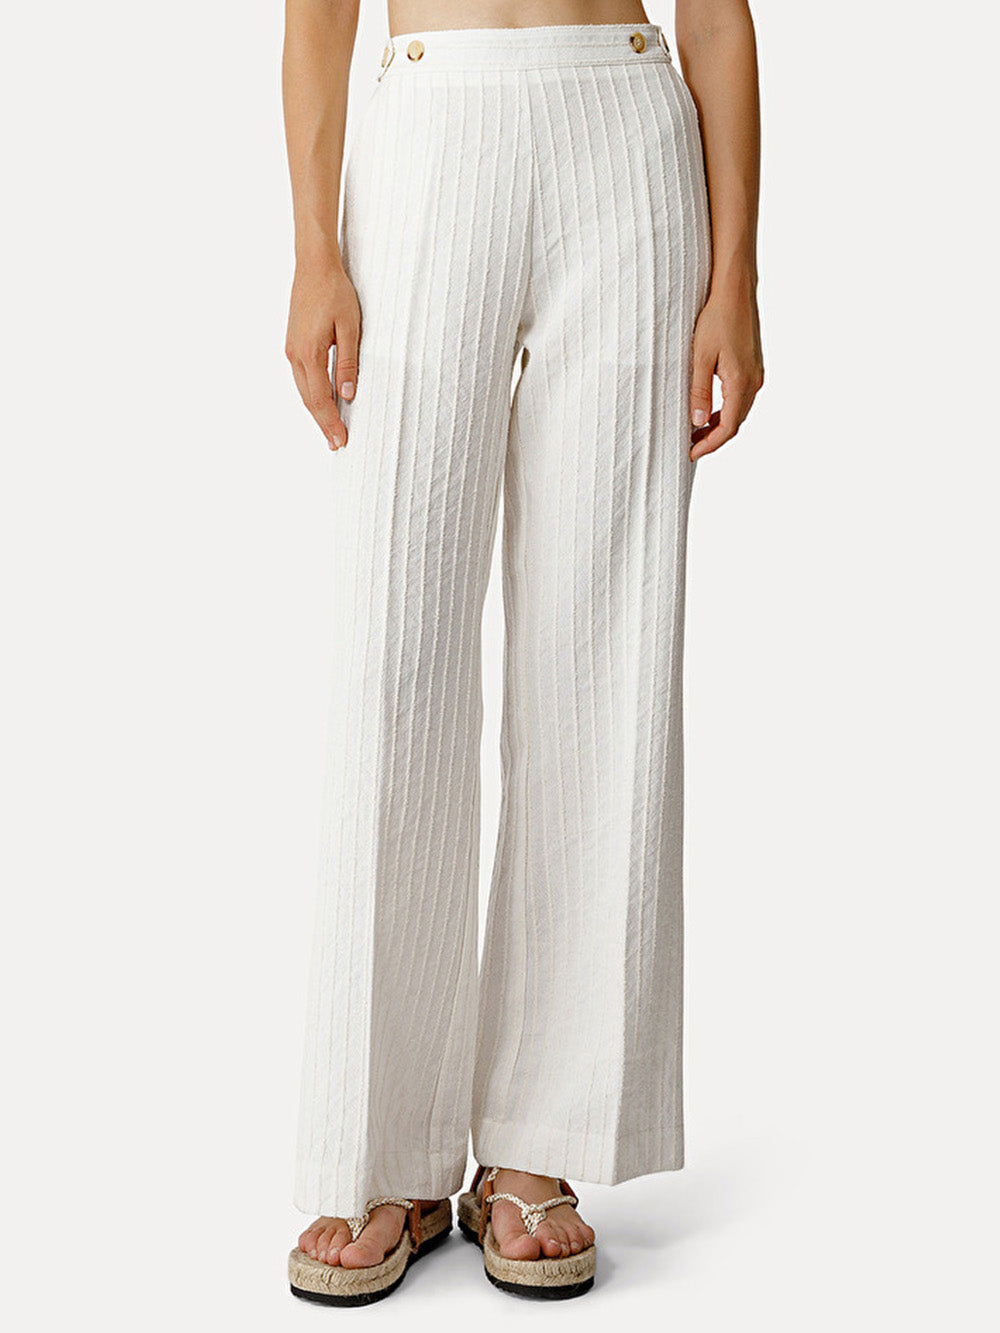 IVORY COTTON AND LINEN FLARE PANTS